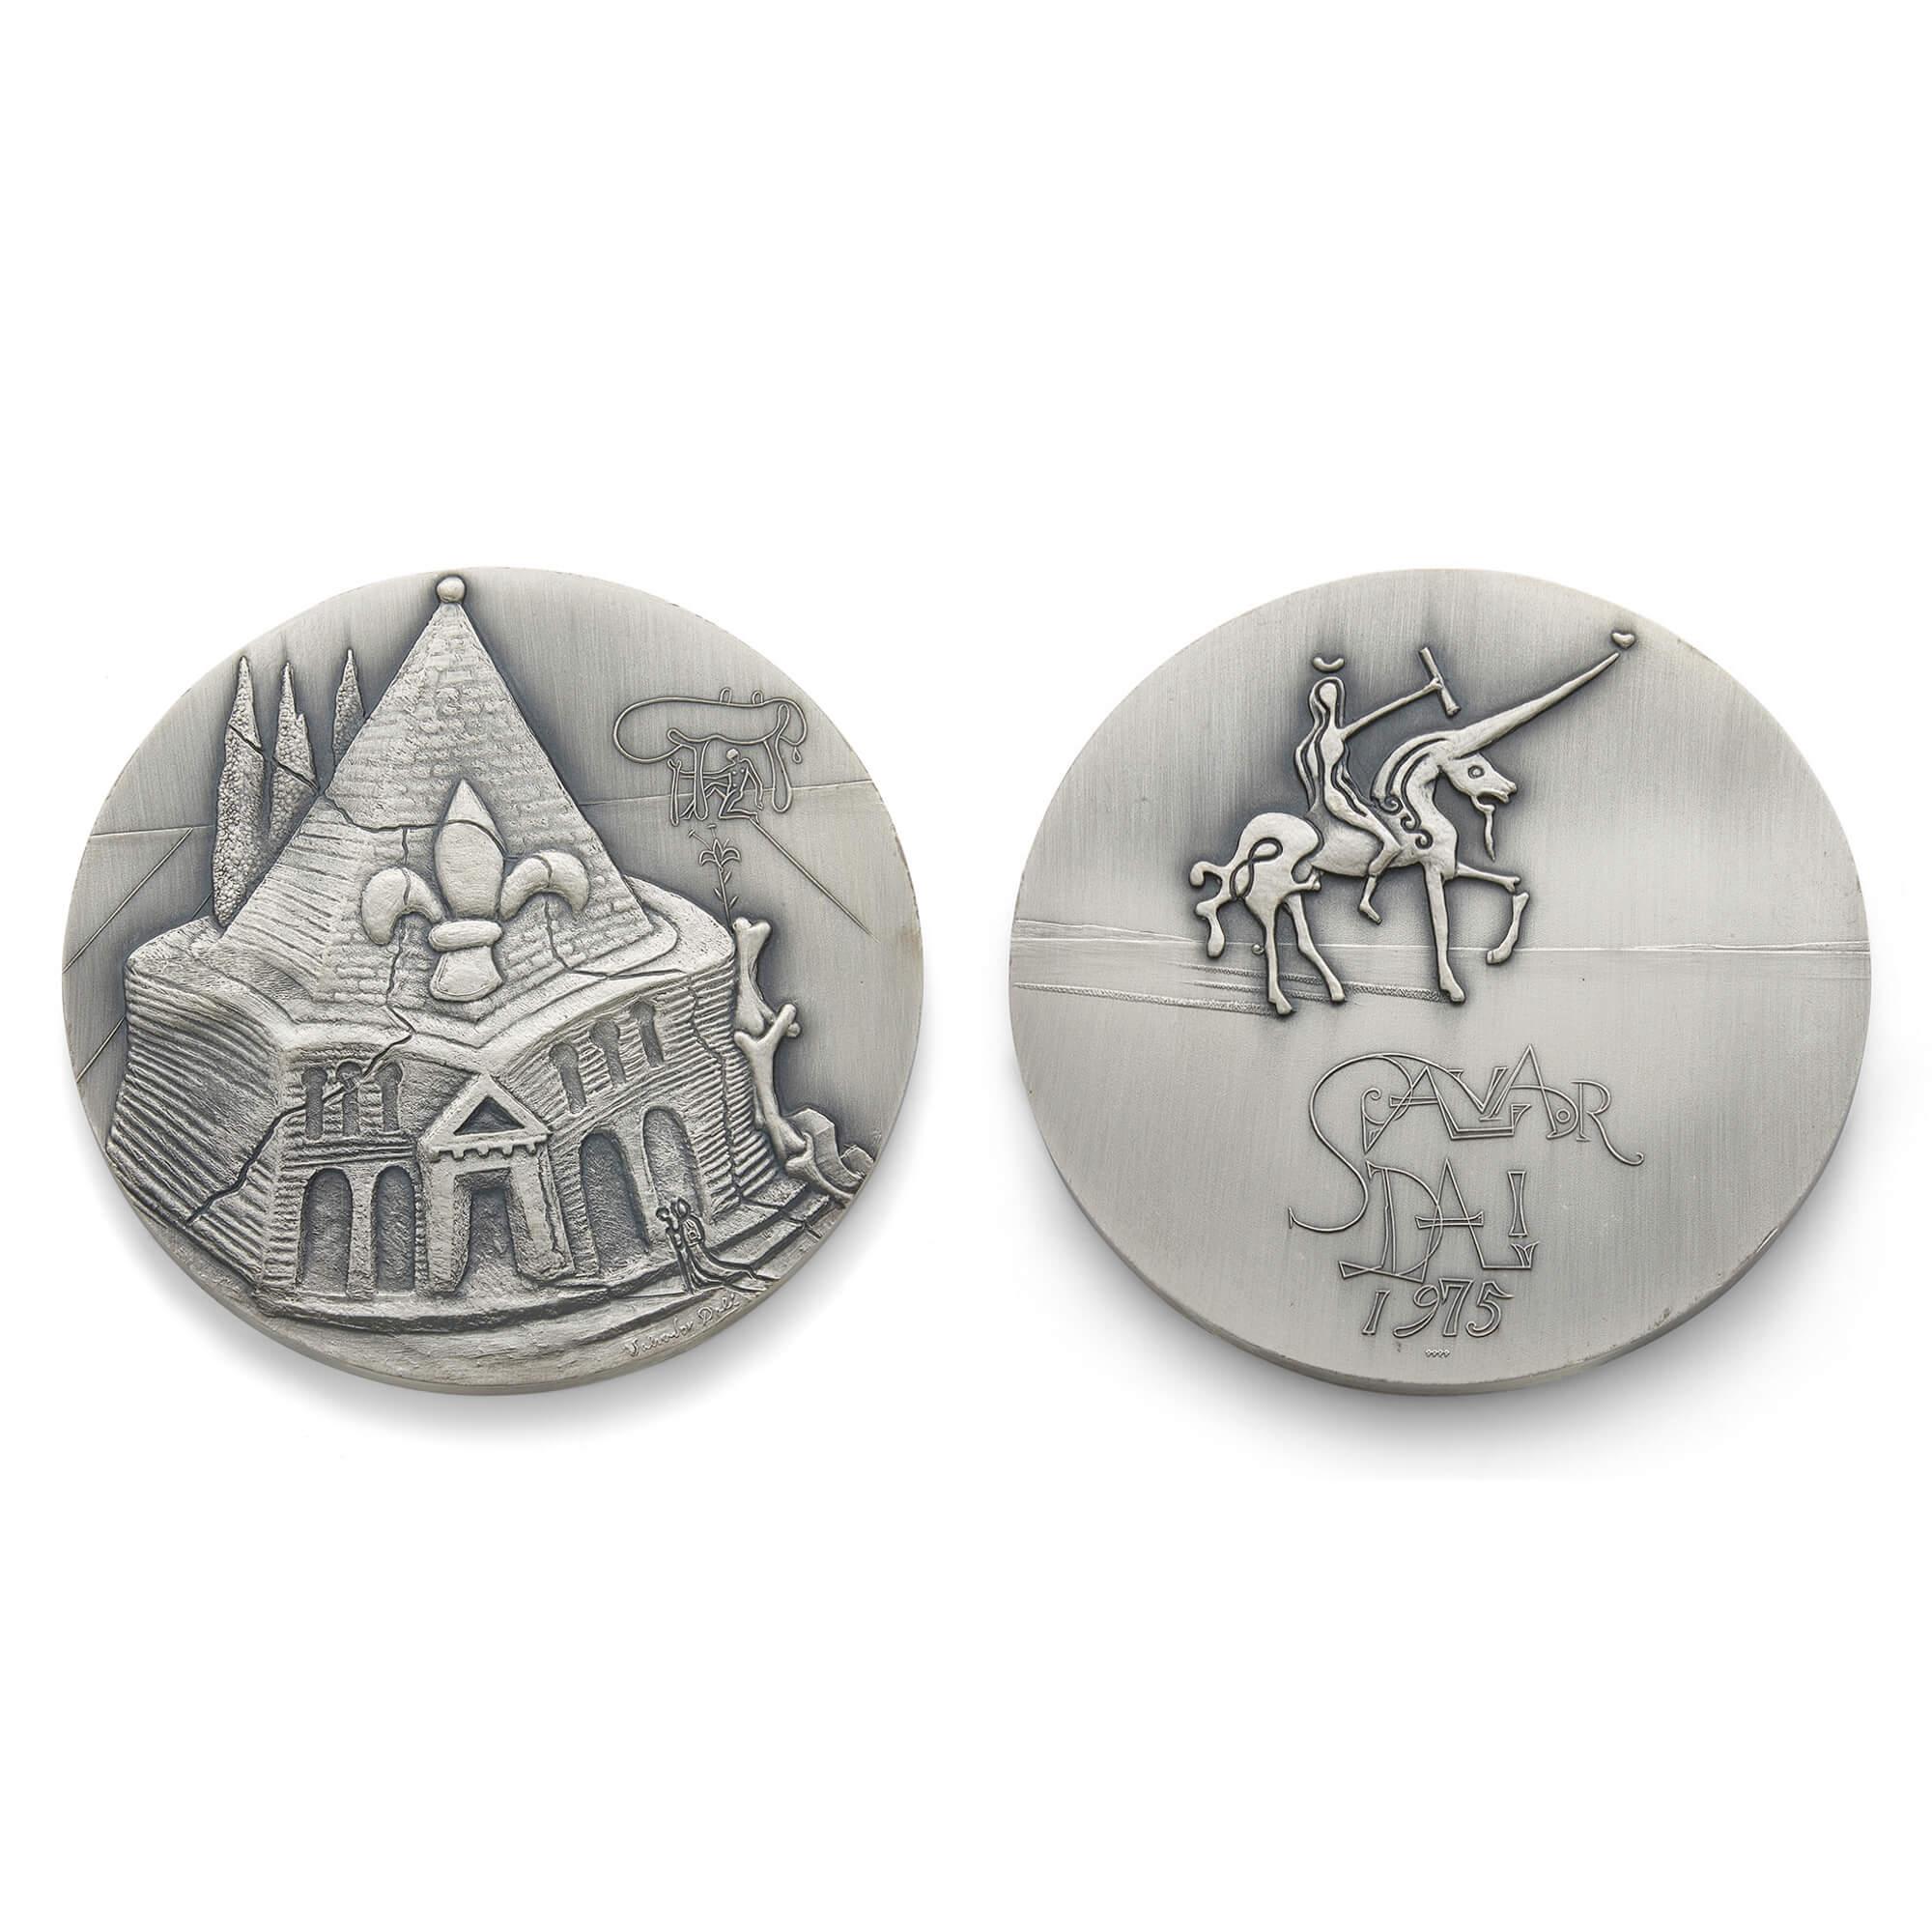 Other ‘The Ten Commandments’ Silver Medal Set by Salvador Dalí For Sale